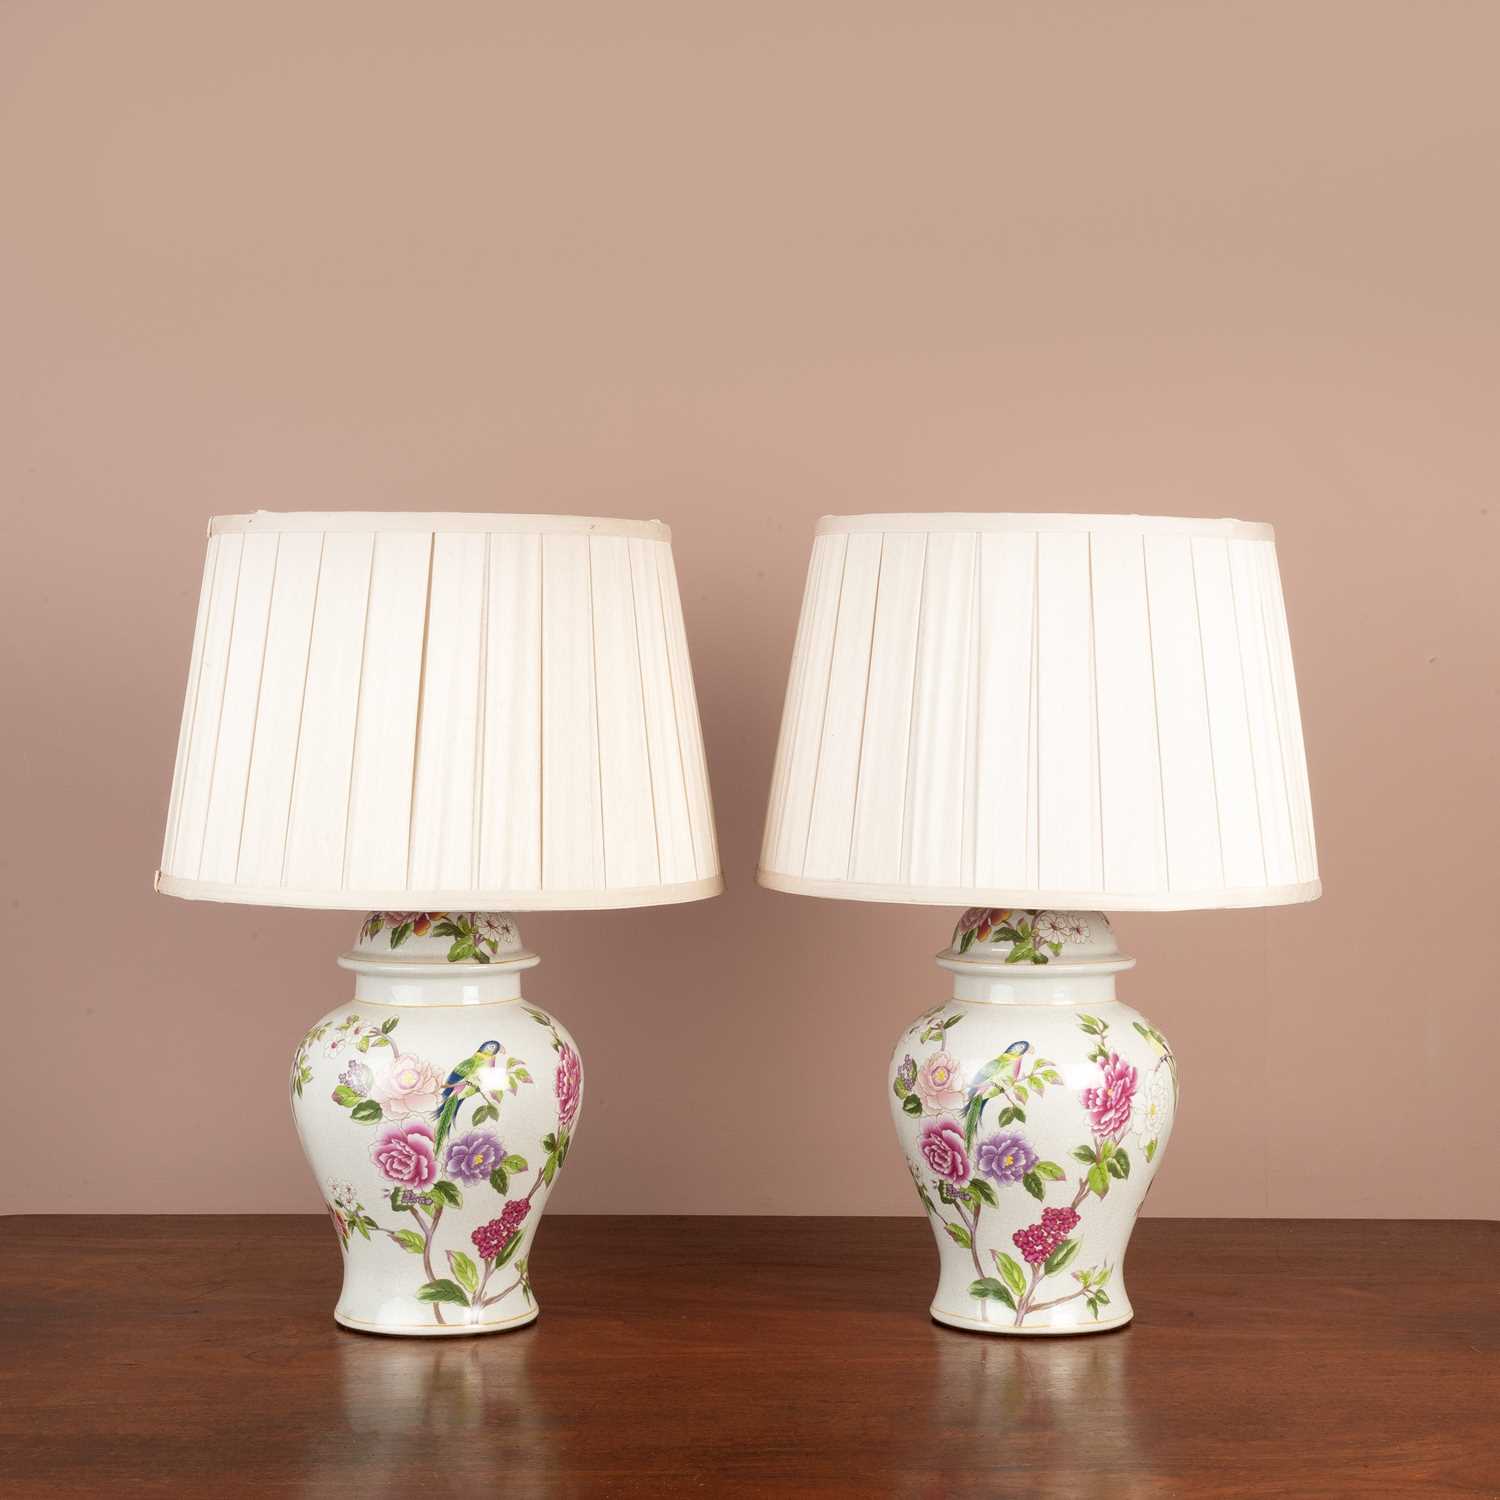 Lot 154 - A pair of crackle glazed lamps of jar and cover form